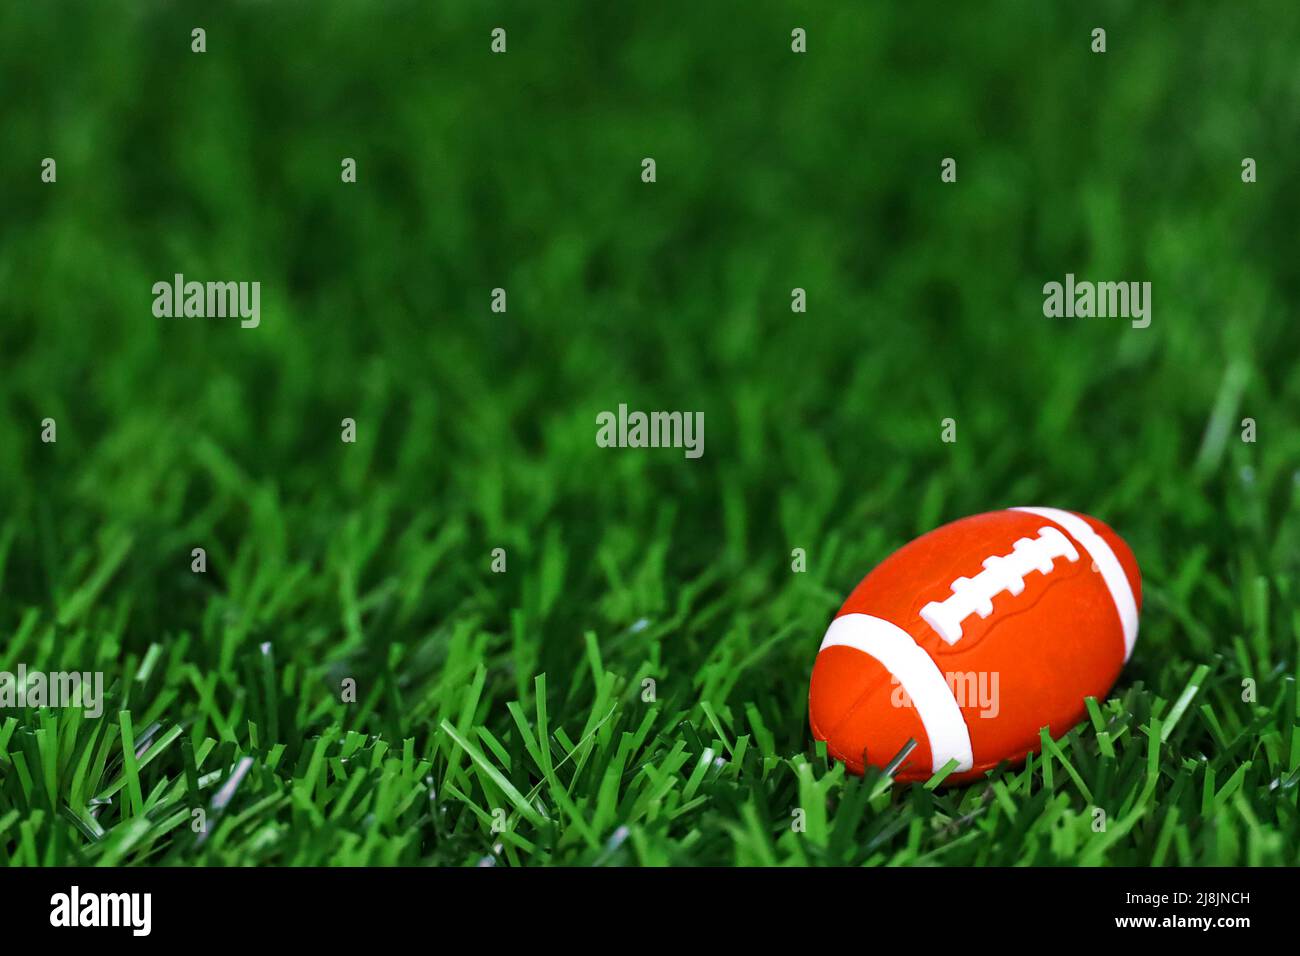 Still life photo of a miniature toy American football ball placed on artificial turf Stock Photo